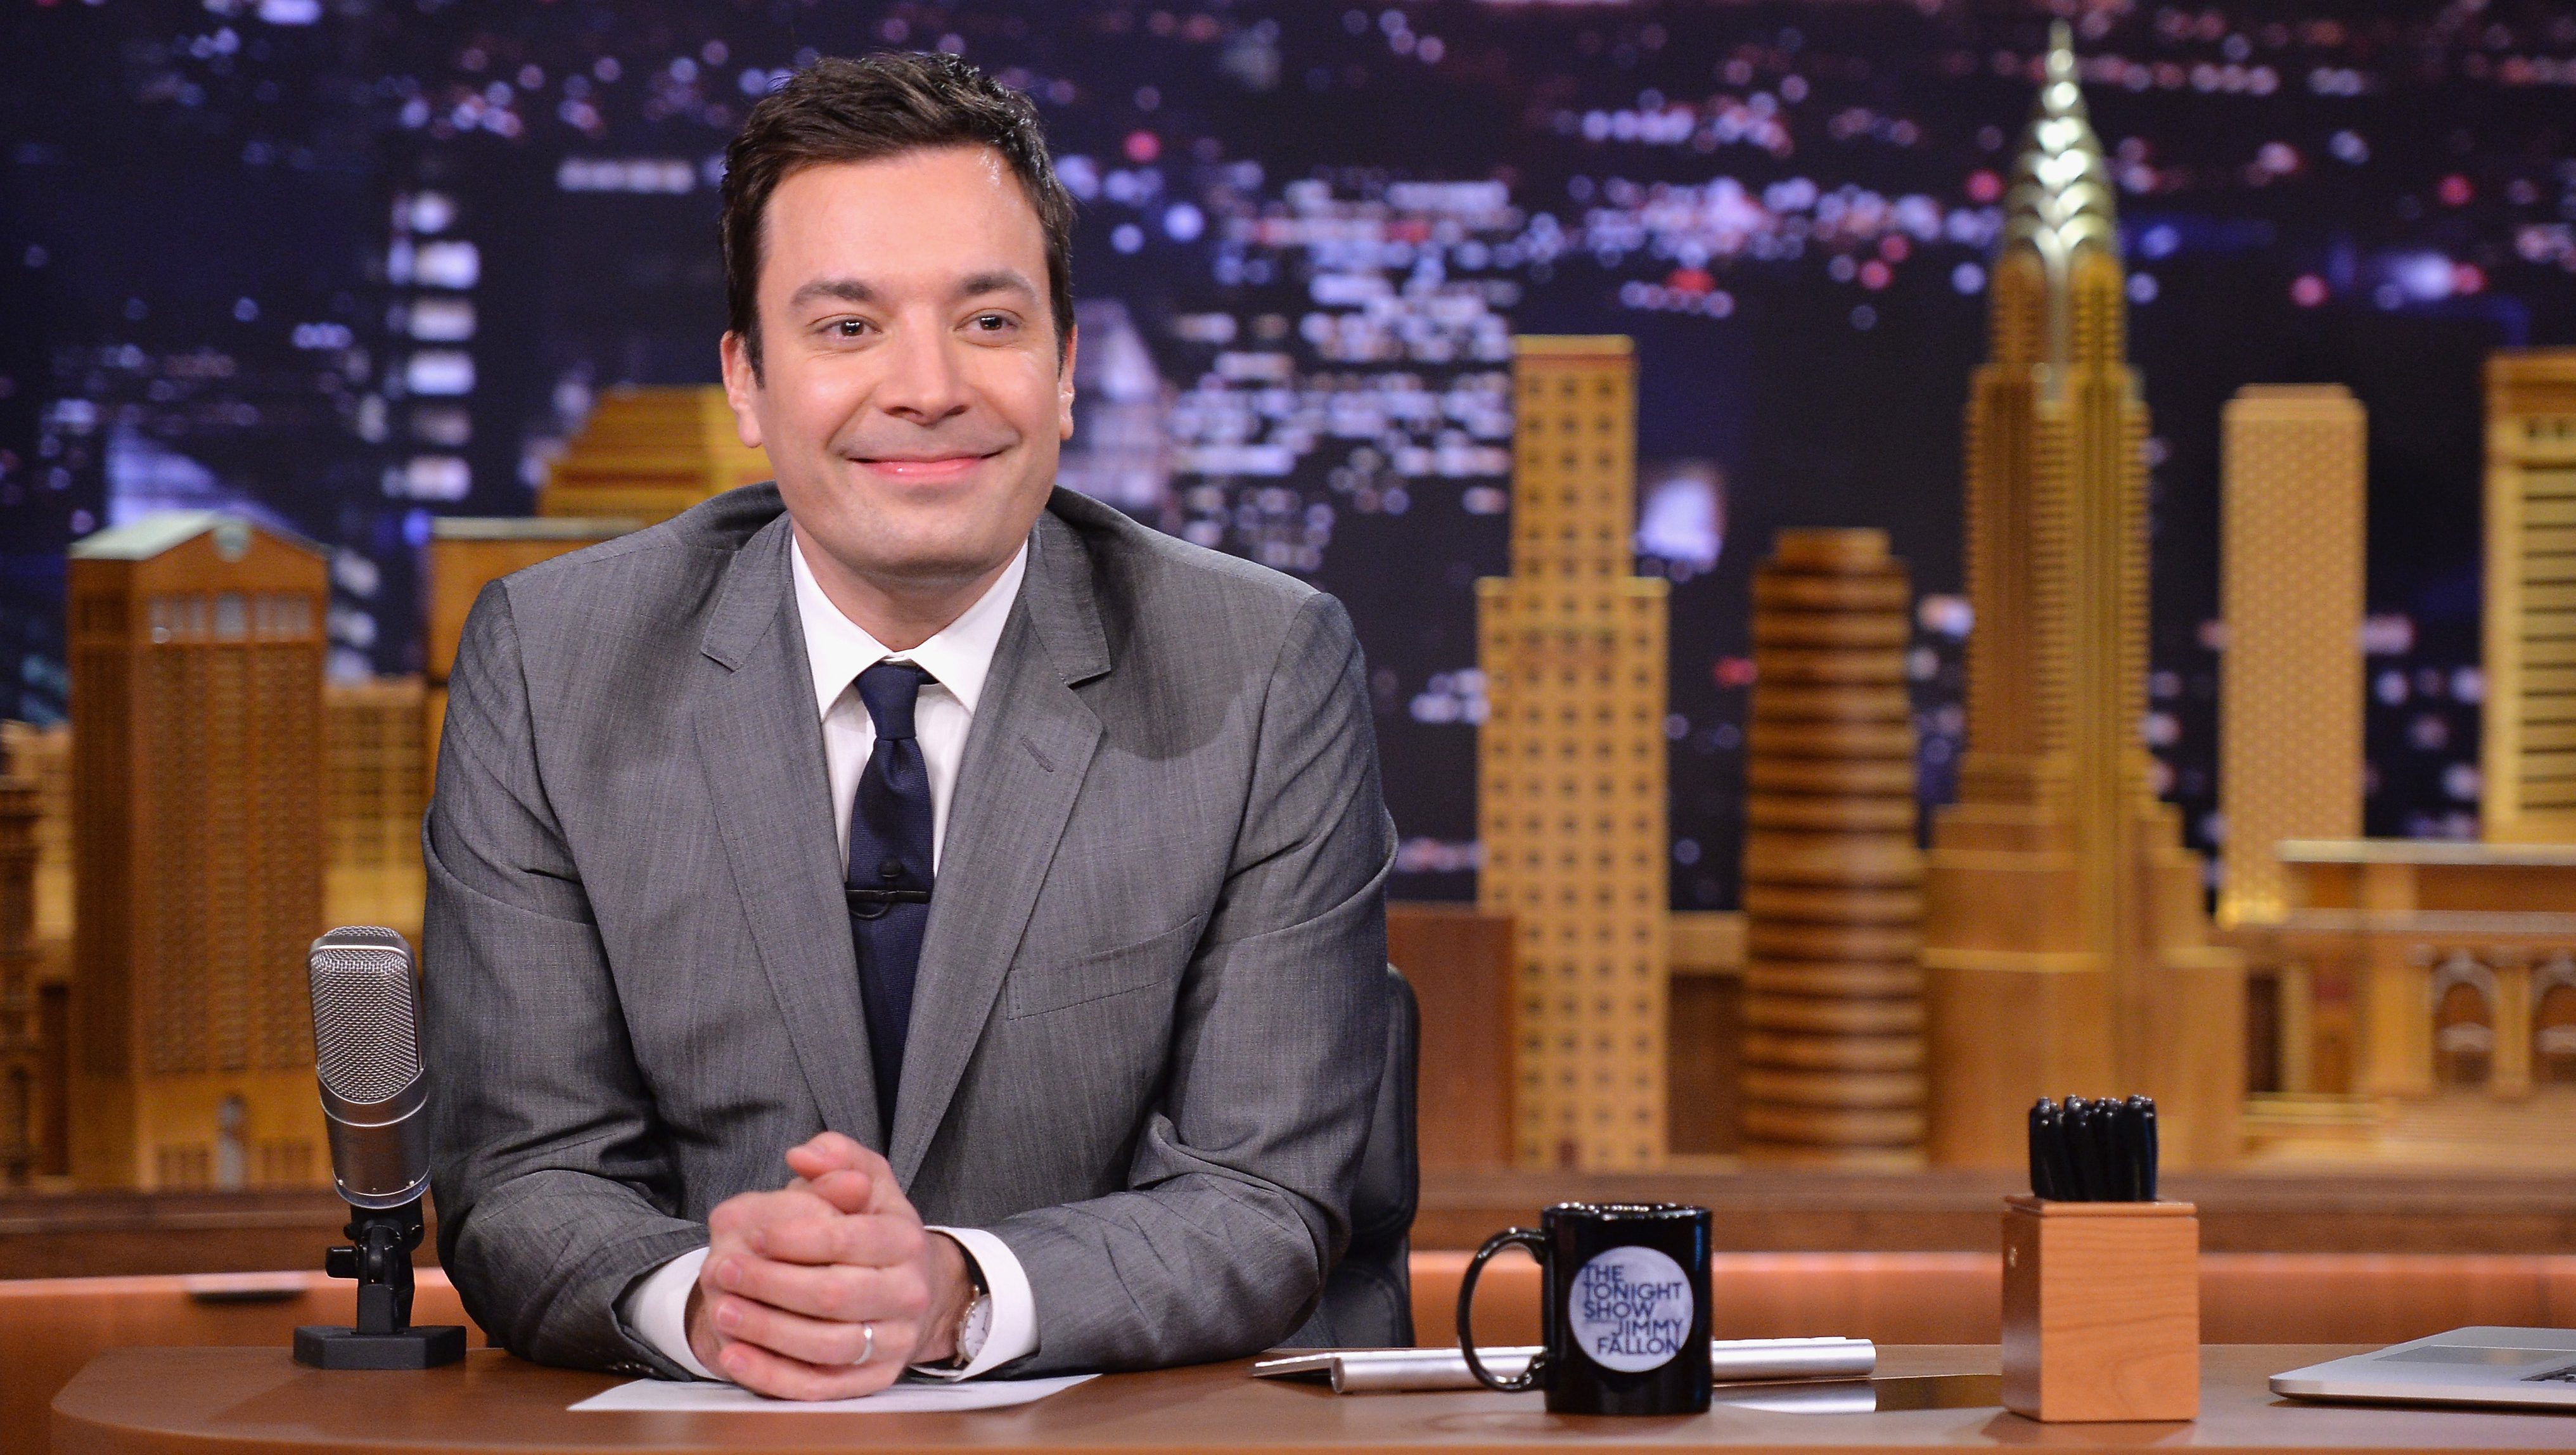 ‘Tonight Show Starring Jimmy Fallon’ This Week’s Guests!